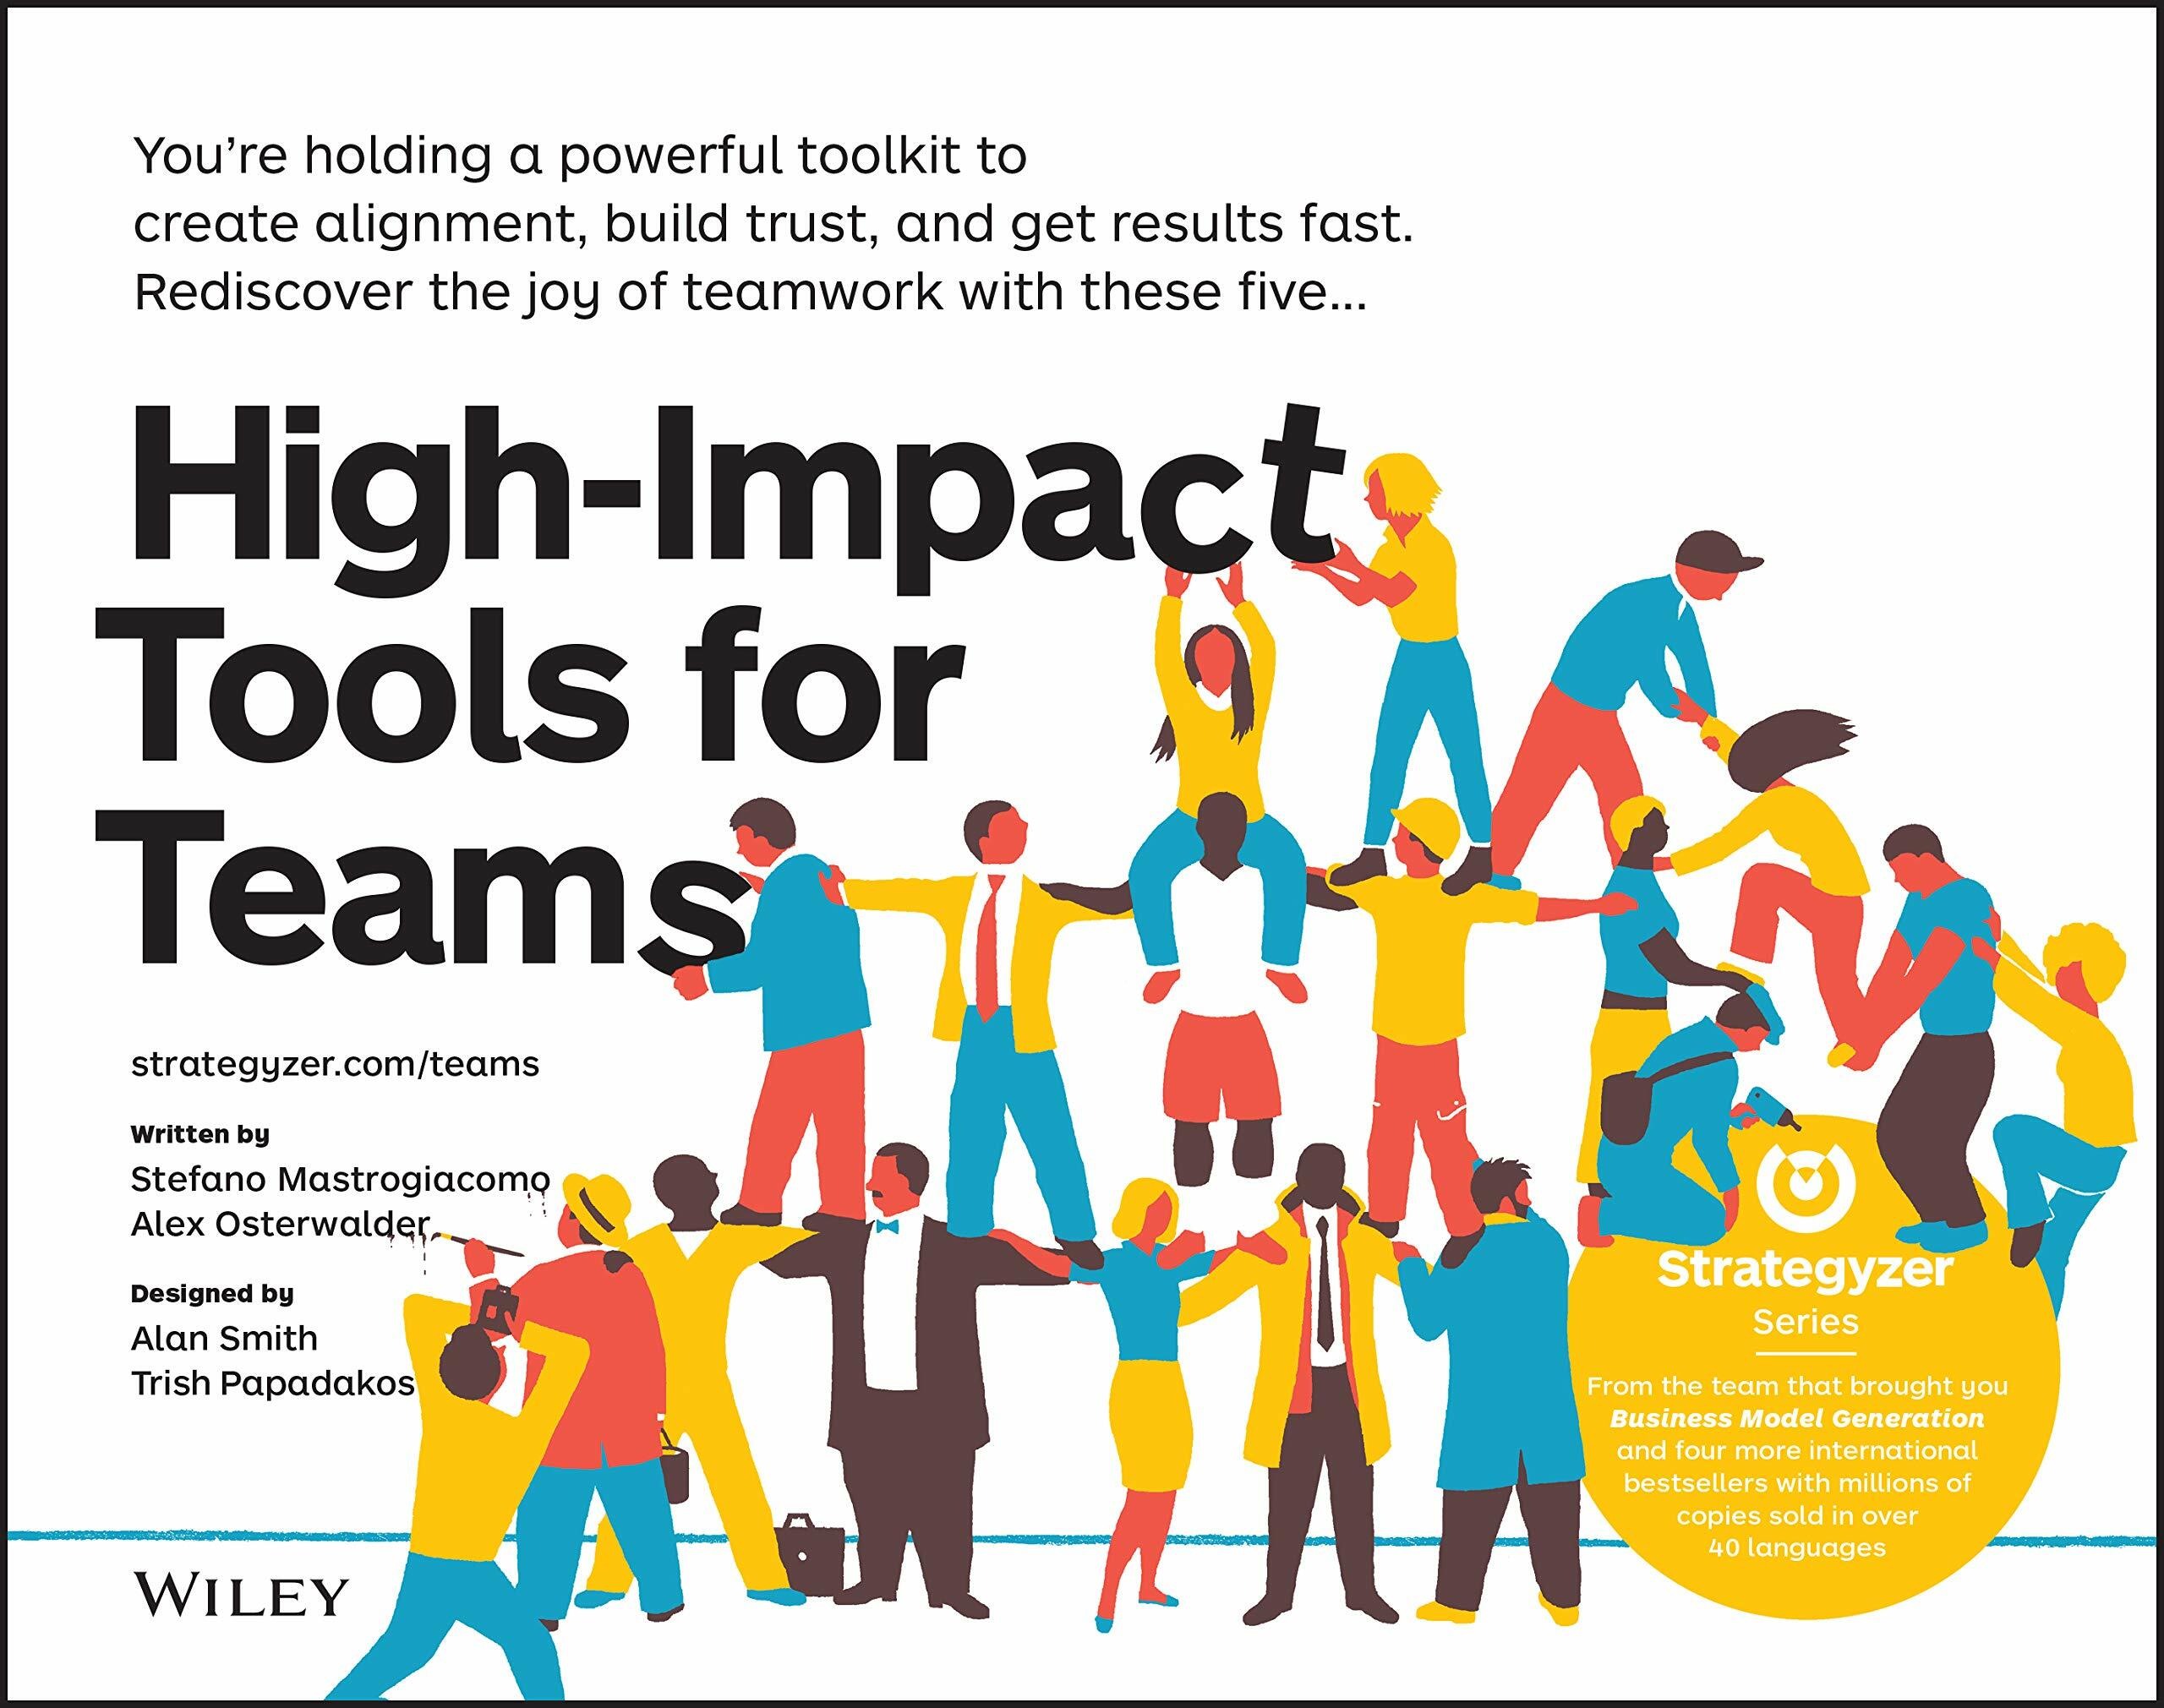 High-Impact Tools for Teams: 5 Tools to Align Team Members, Build Trust, and Get Results Fast (Paperback)